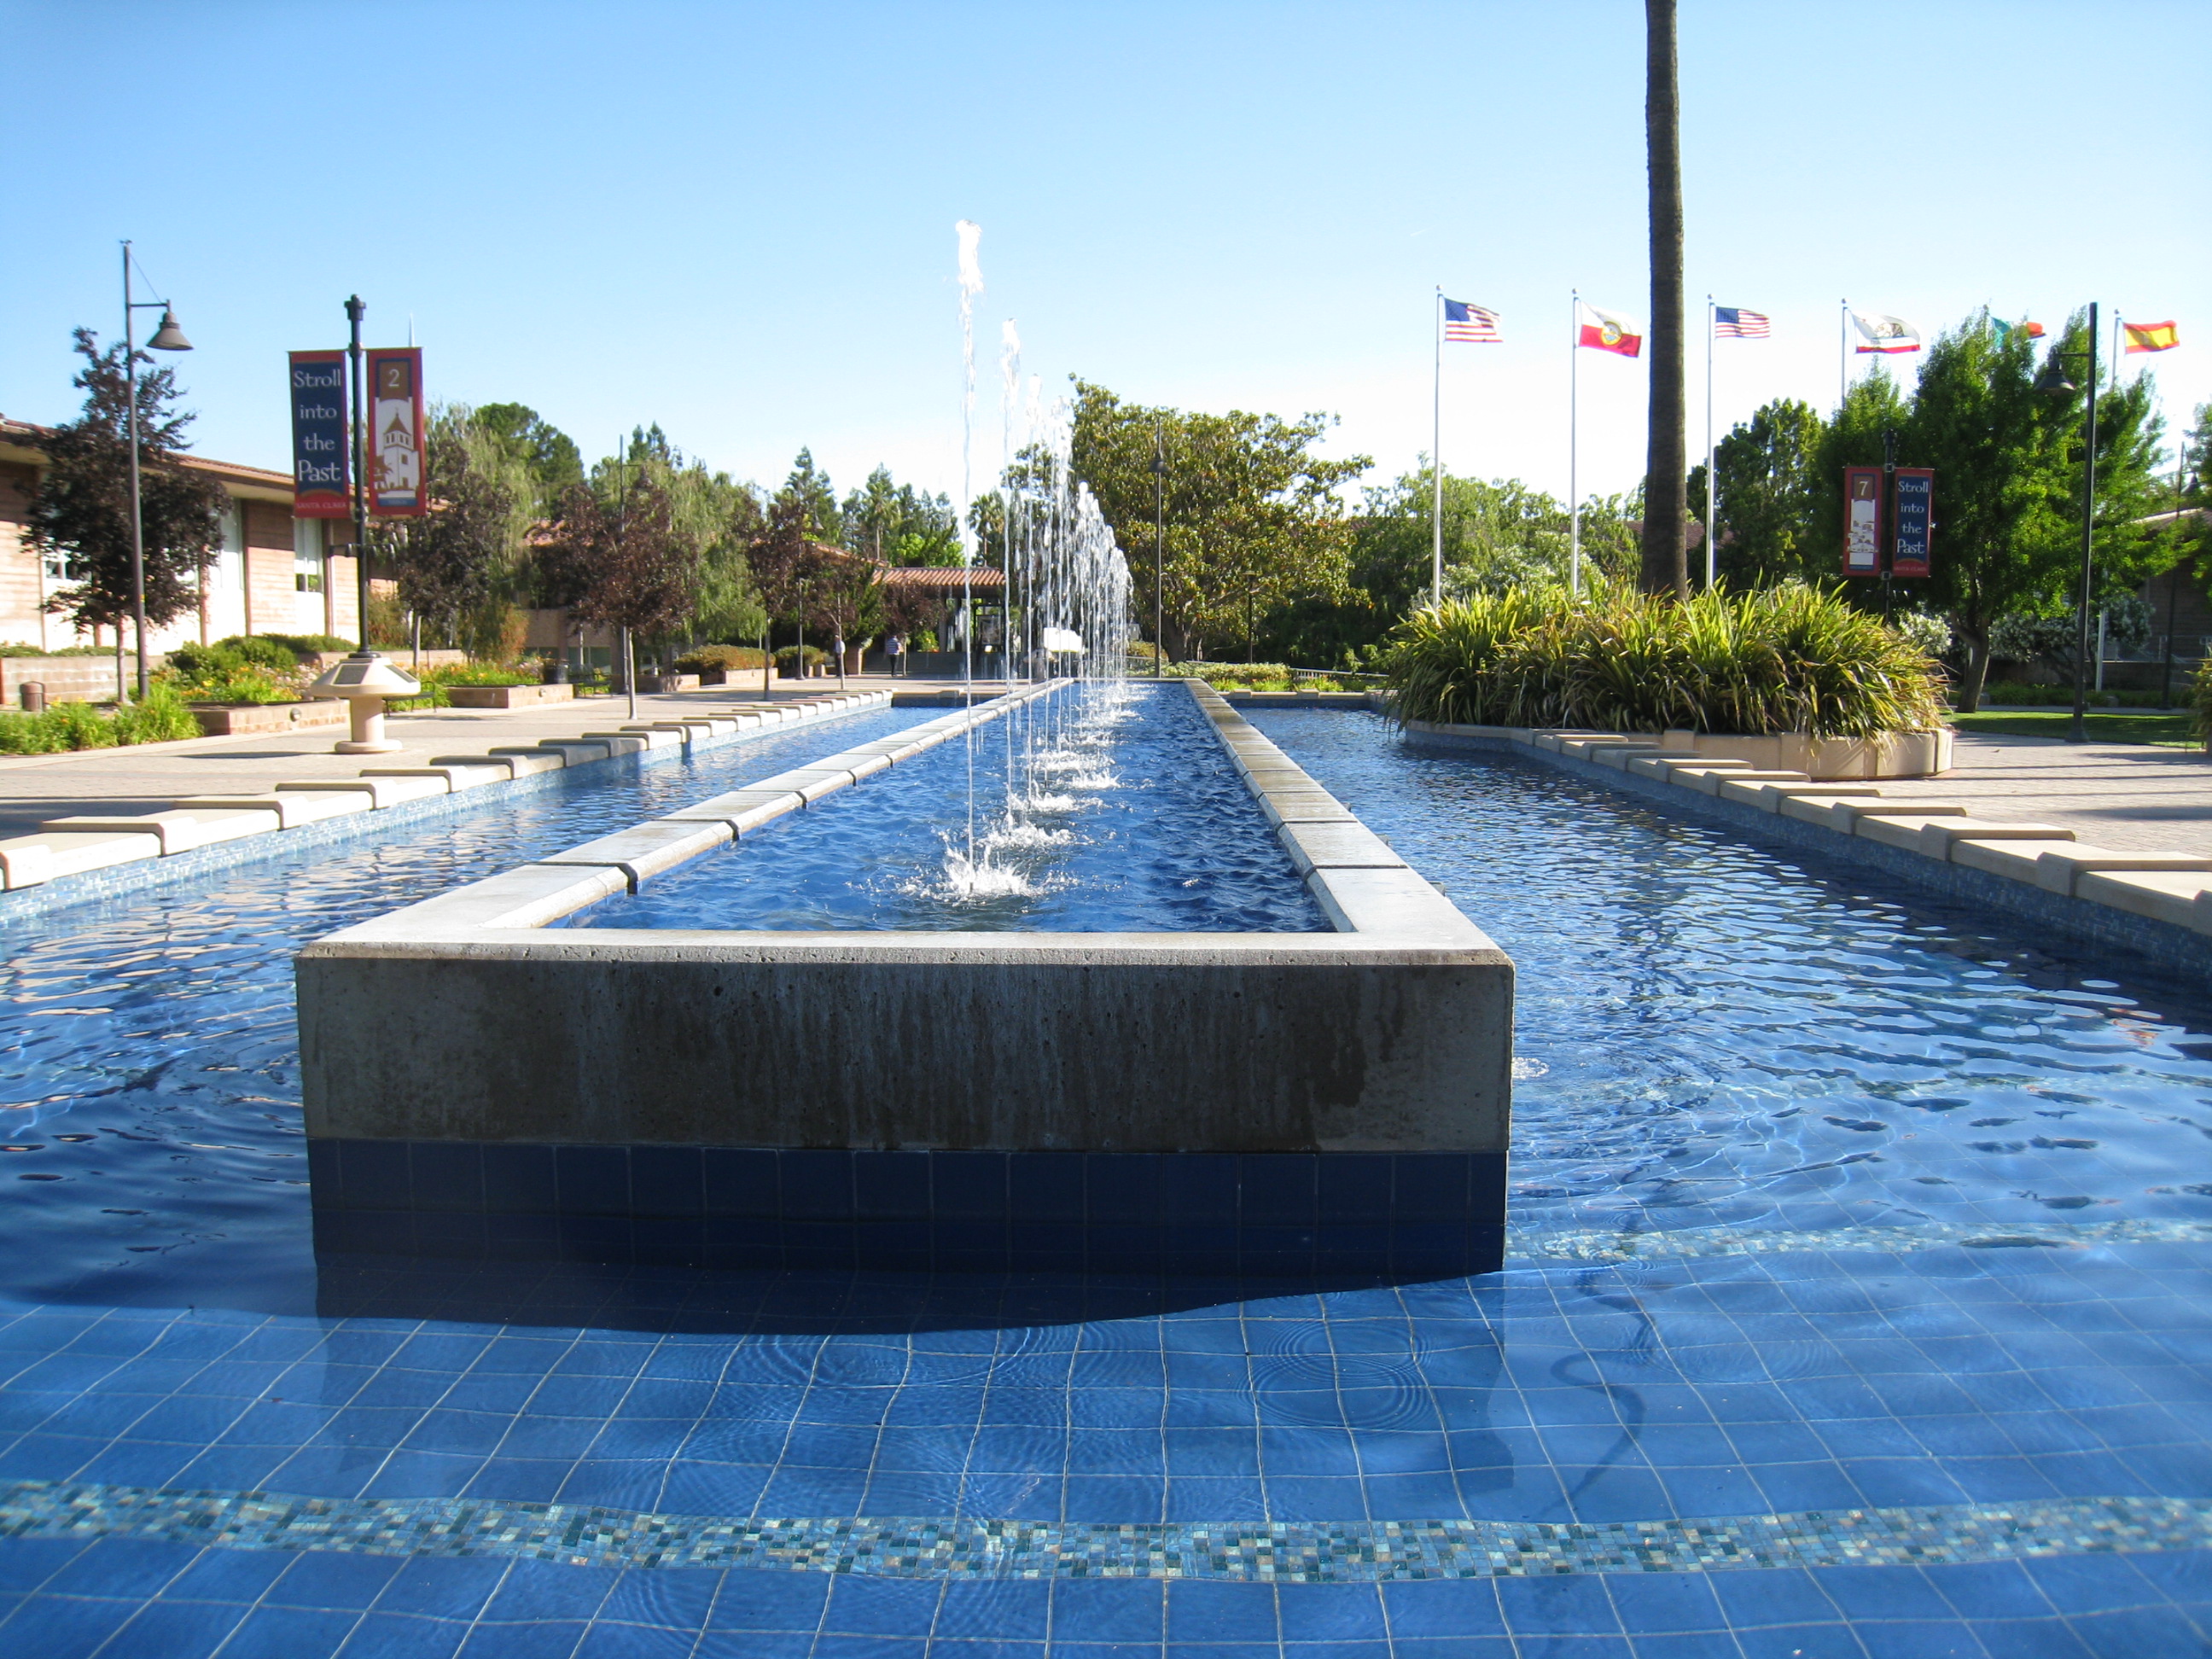 File:City hall fountains and flags.jpg - Wikimedia Commons